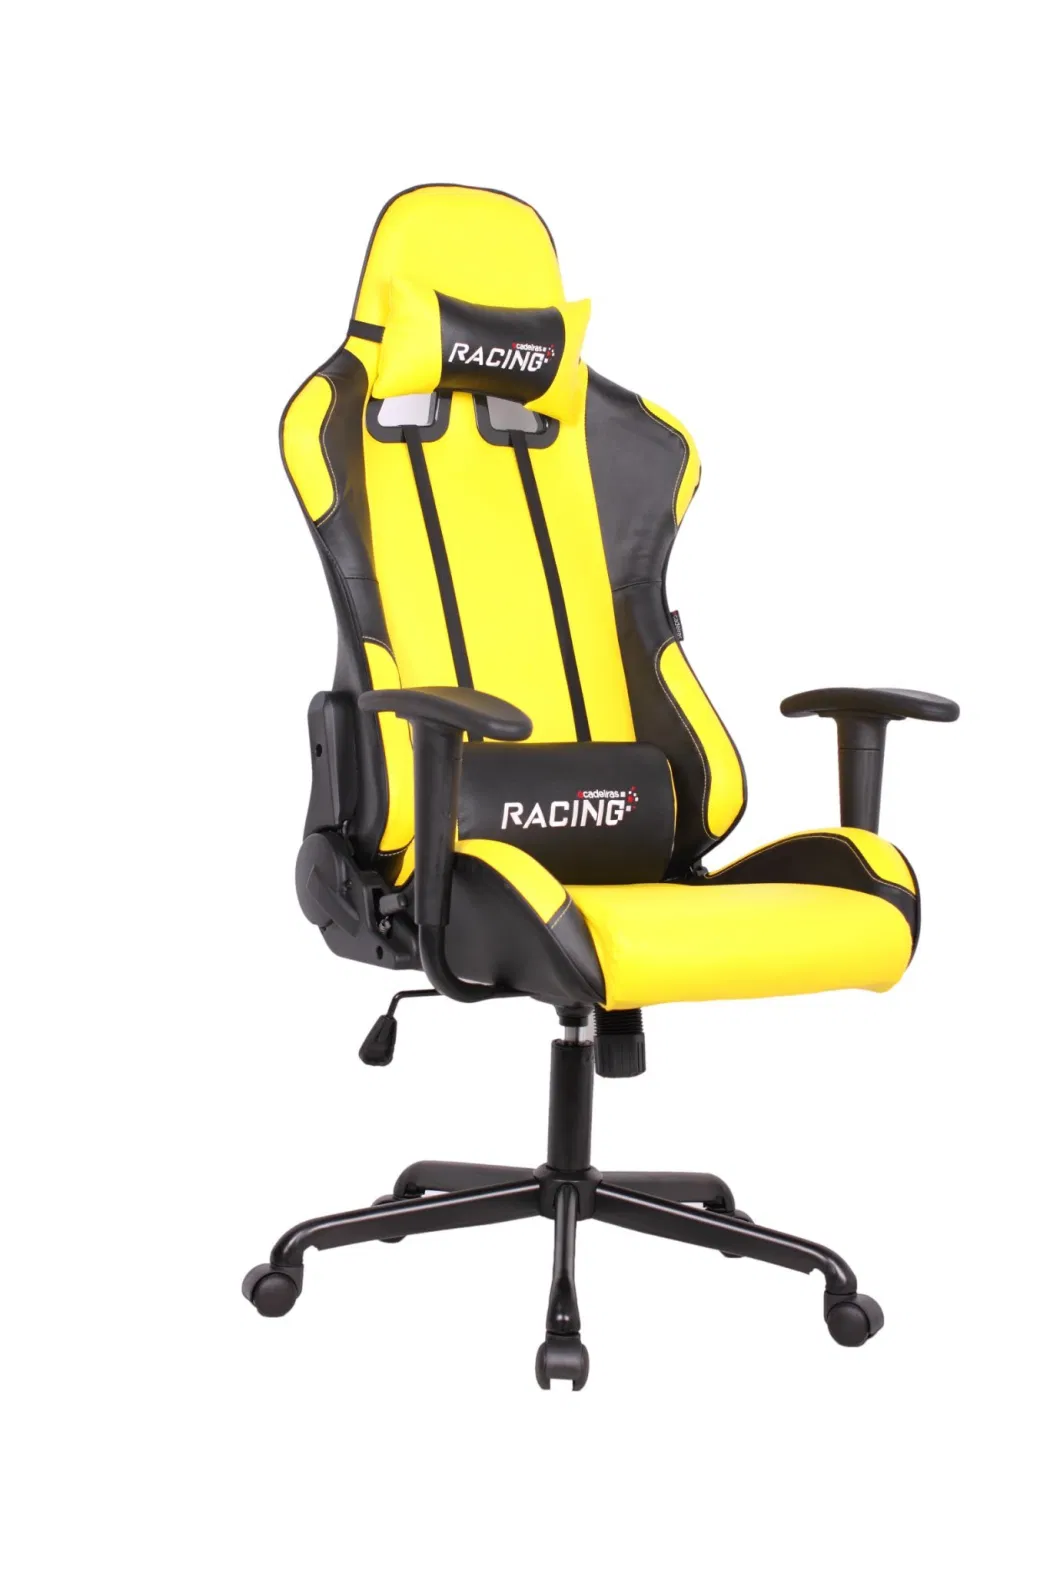 Sidanli Youth Video Game Chair, Large Video Game Chair, Yellow.